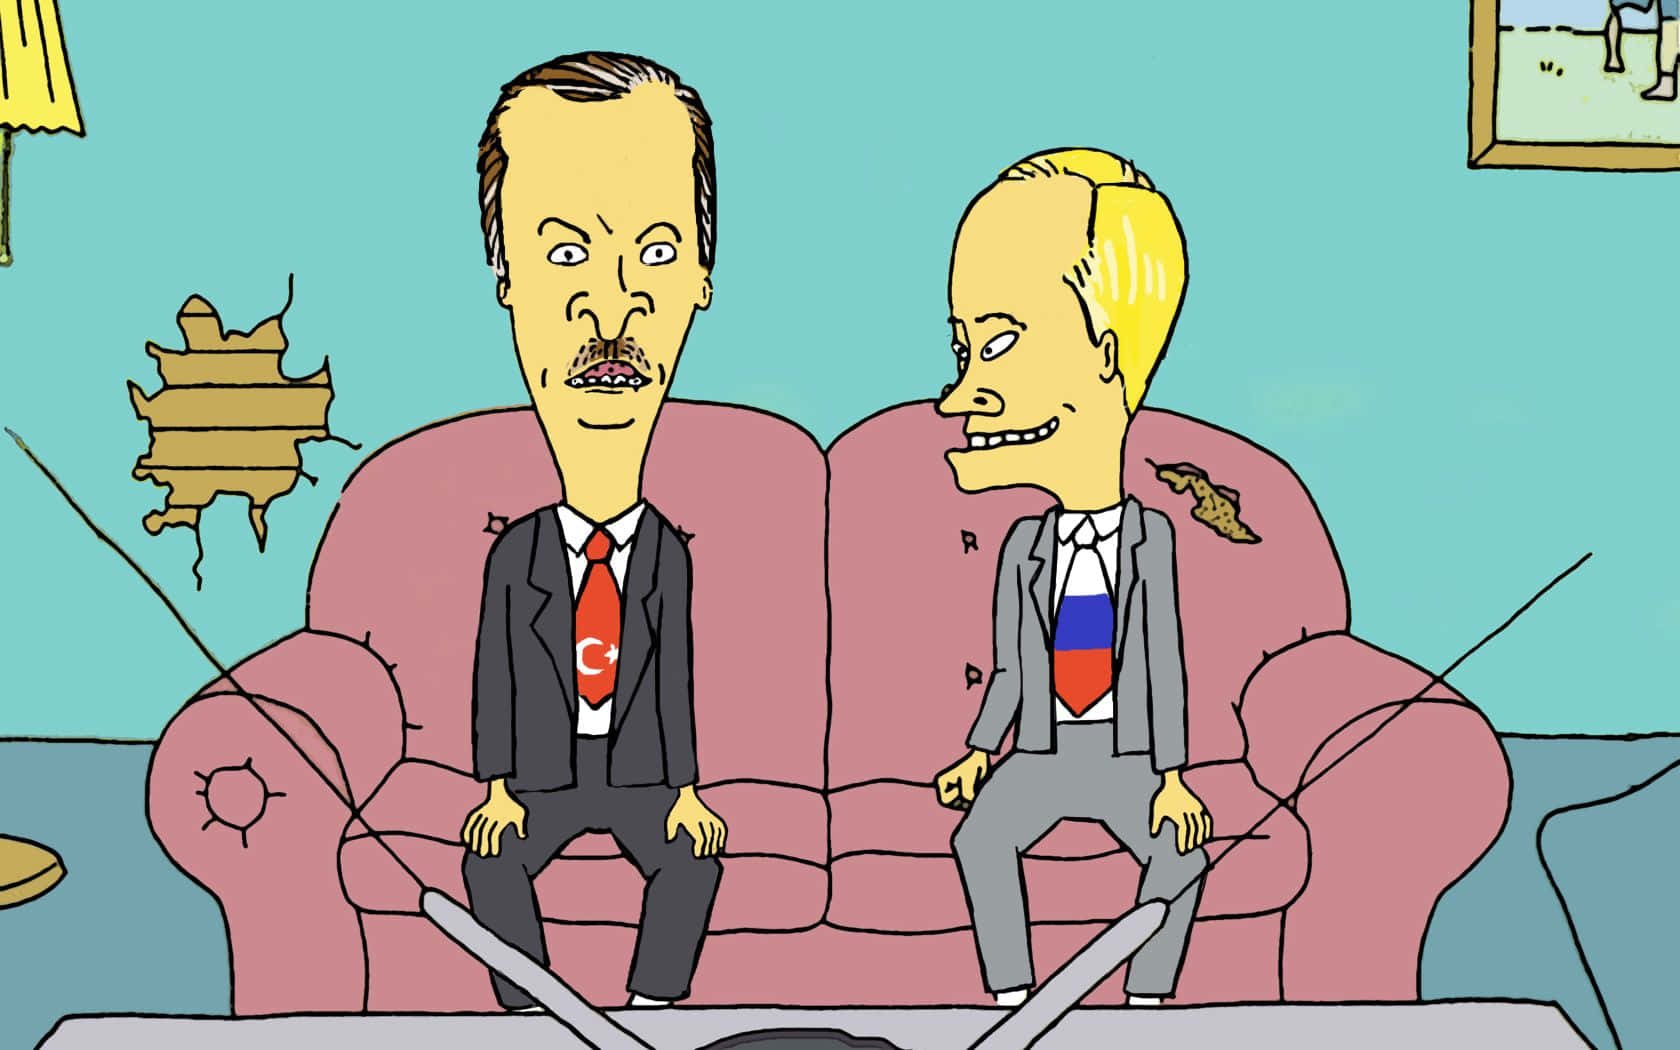 "Beavis and Butthead Are at It Again"